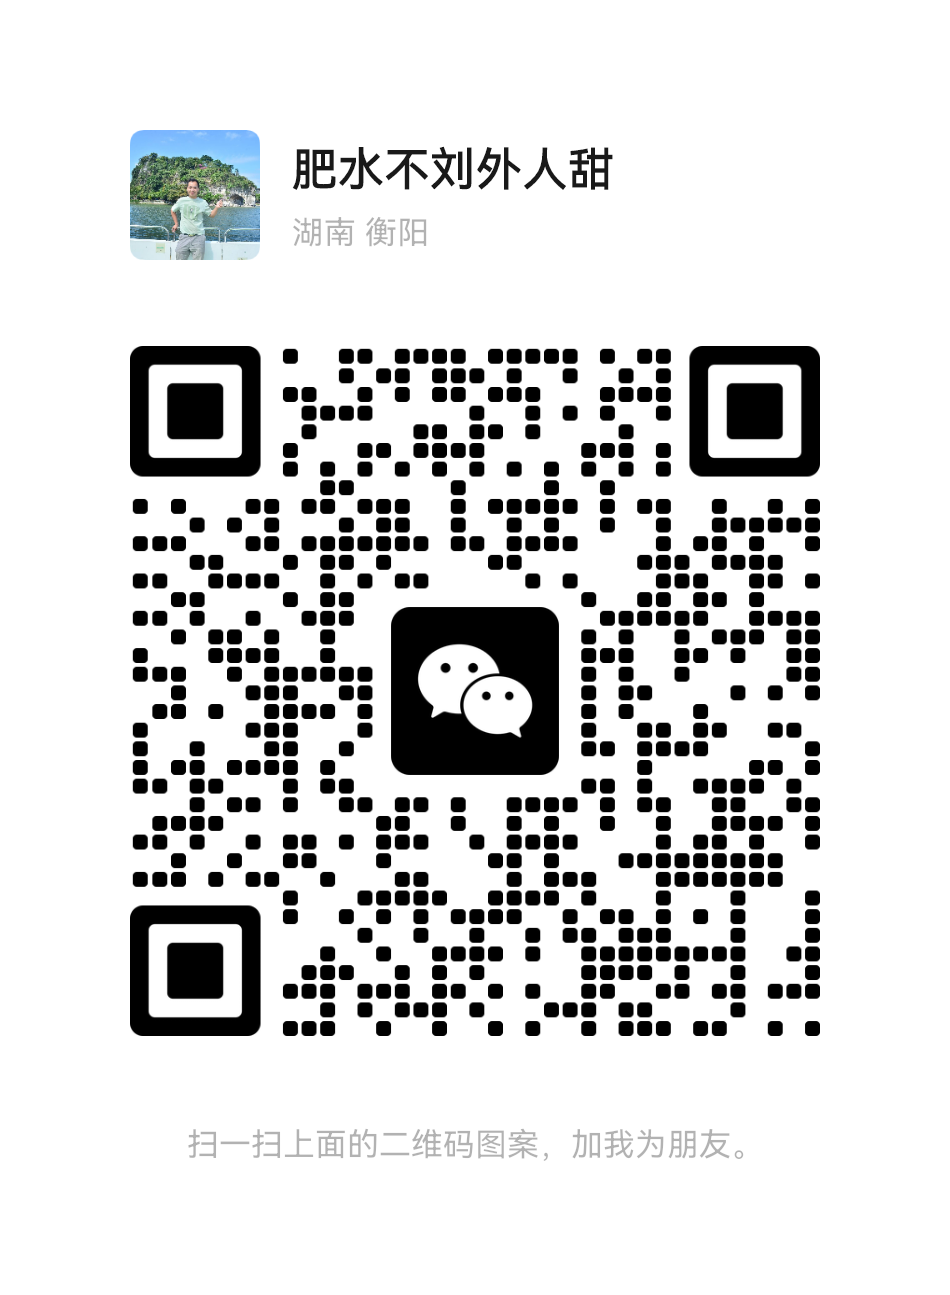 mmqrcode1701614102851.png